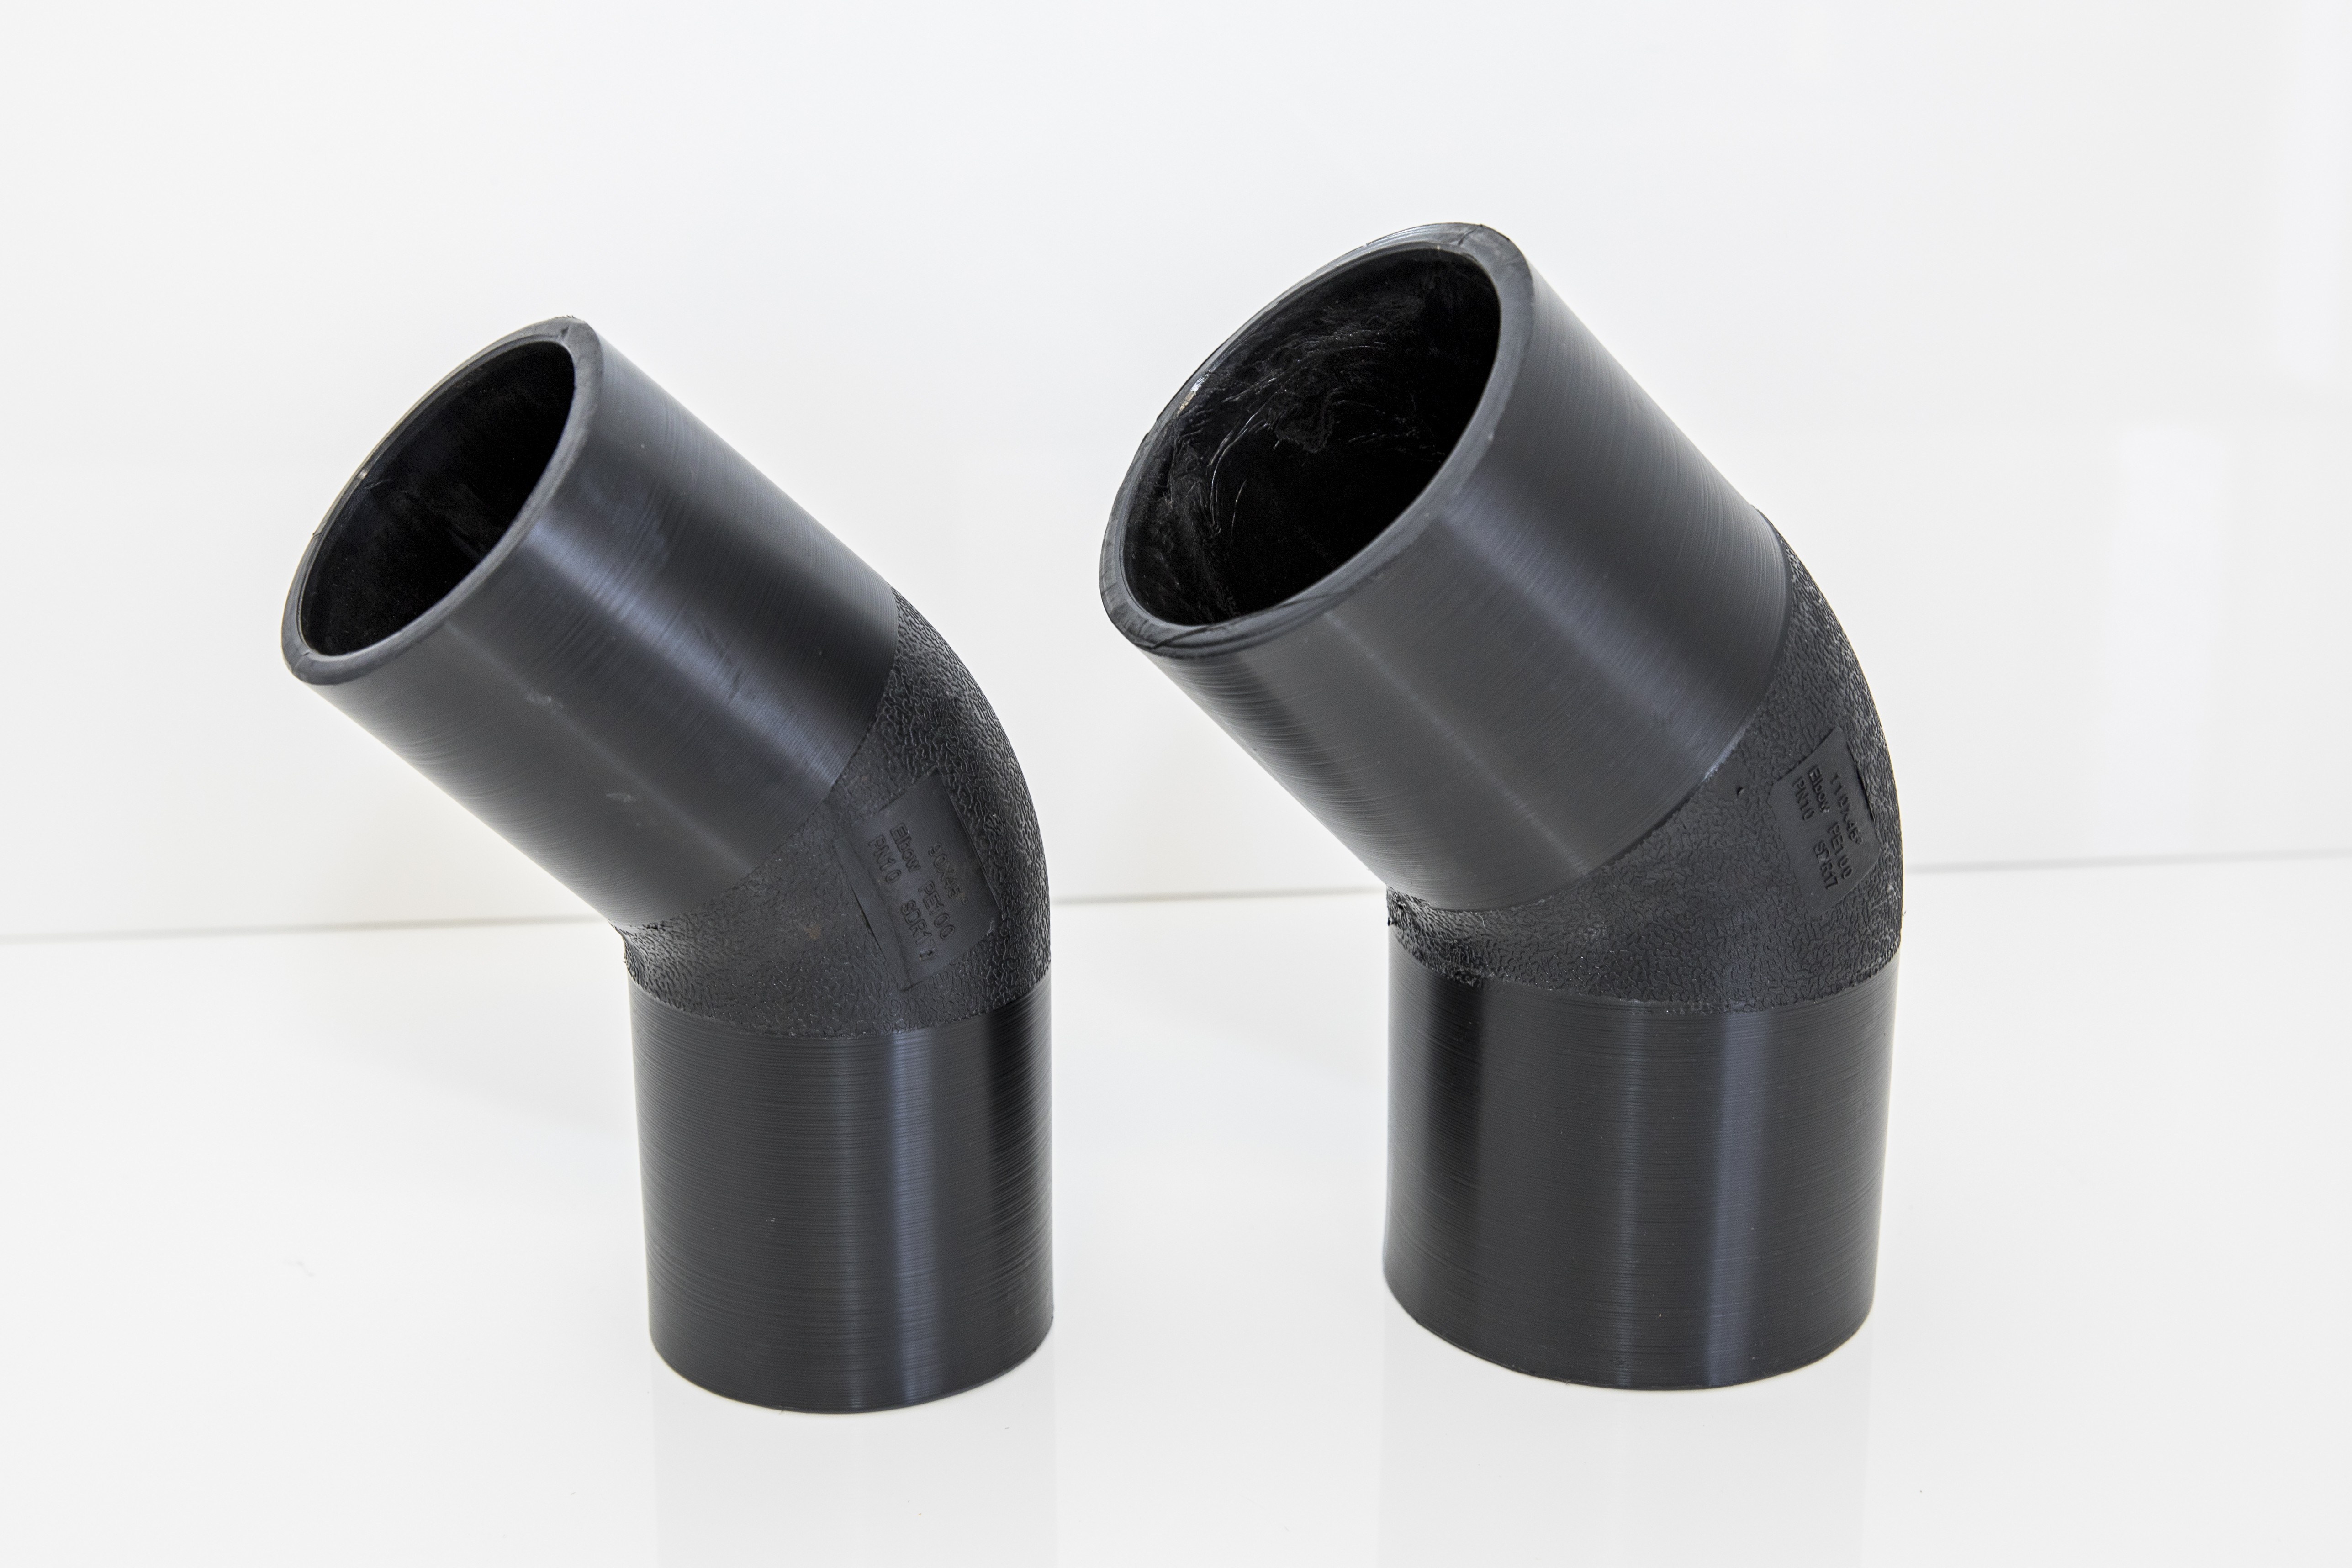 An image of two 45 degree polyethylene elbows standing next to each other against a white background.